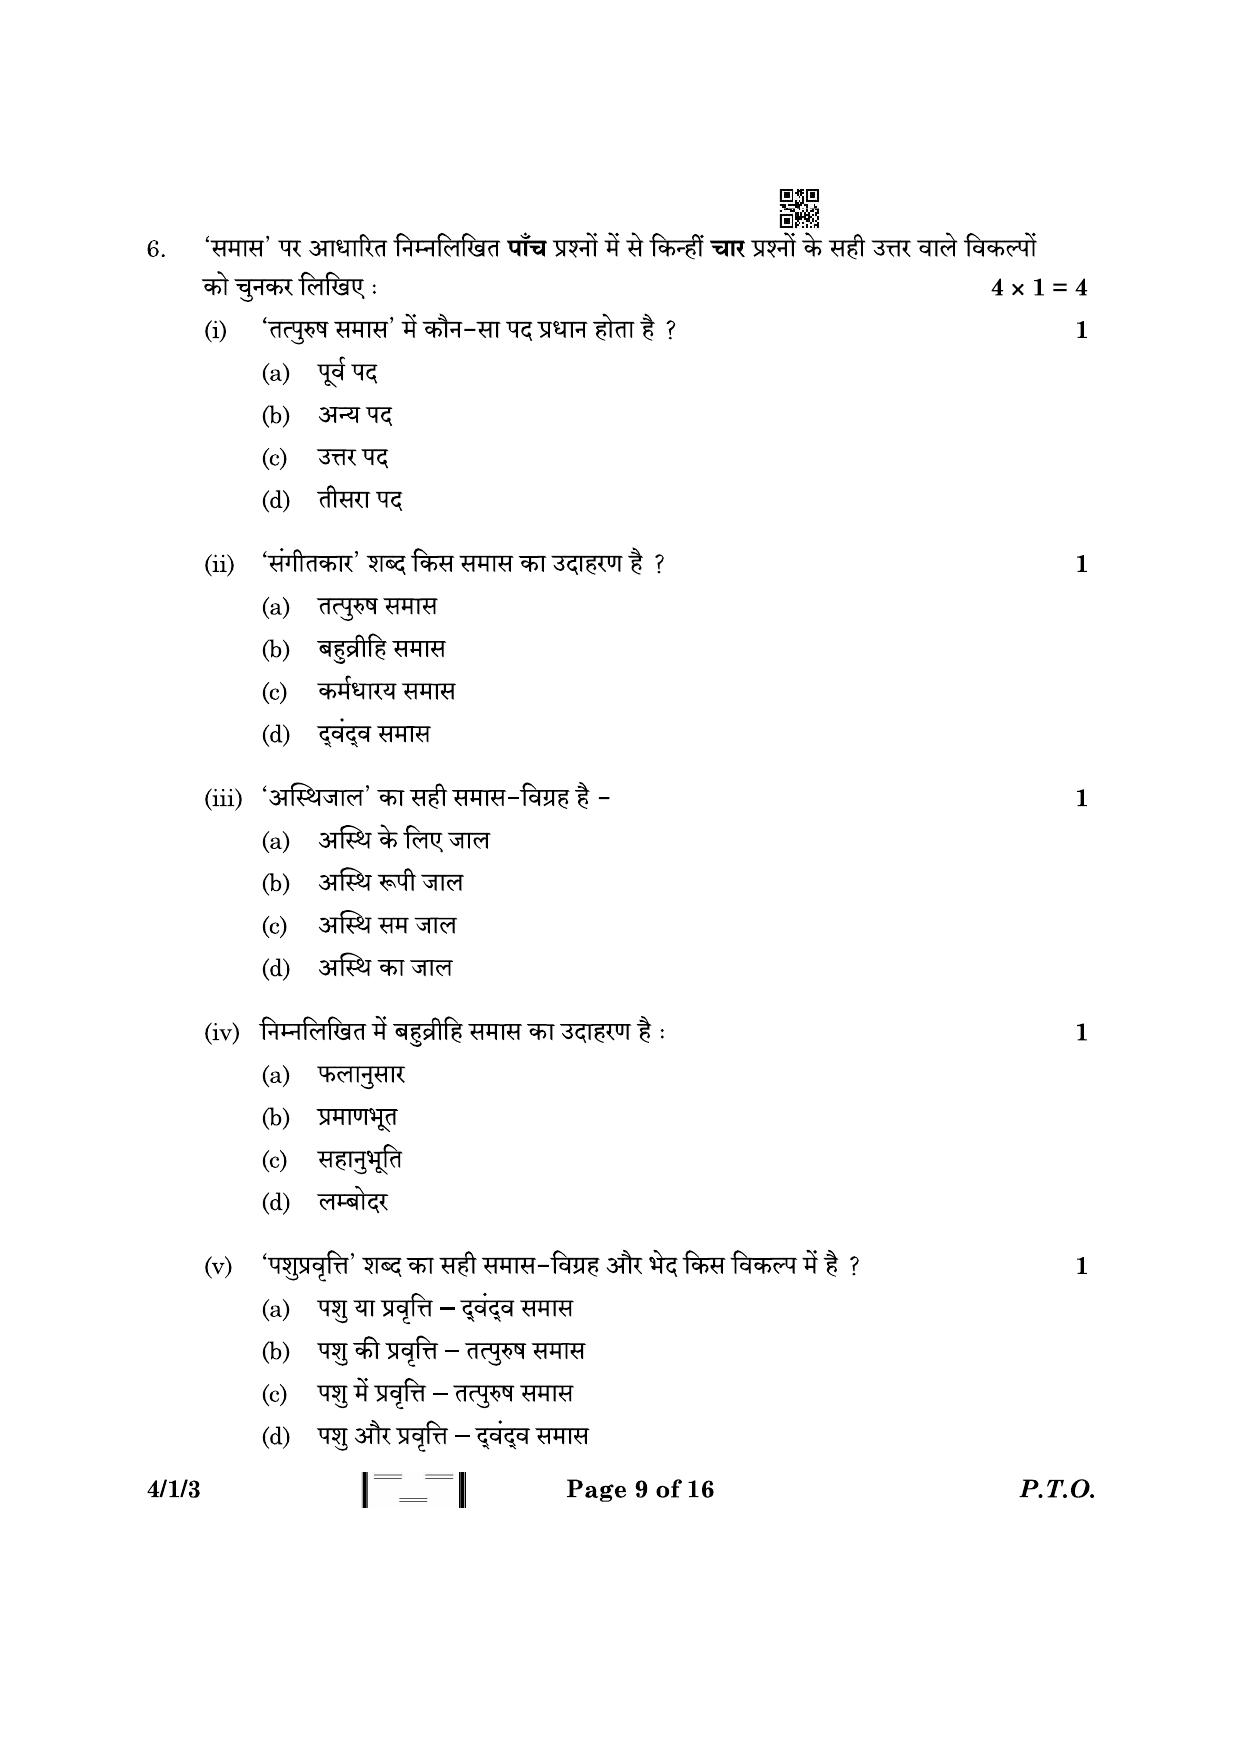 CBSE Class 10 4-1-3 Hindi B 2023 Question Paper - Page 9